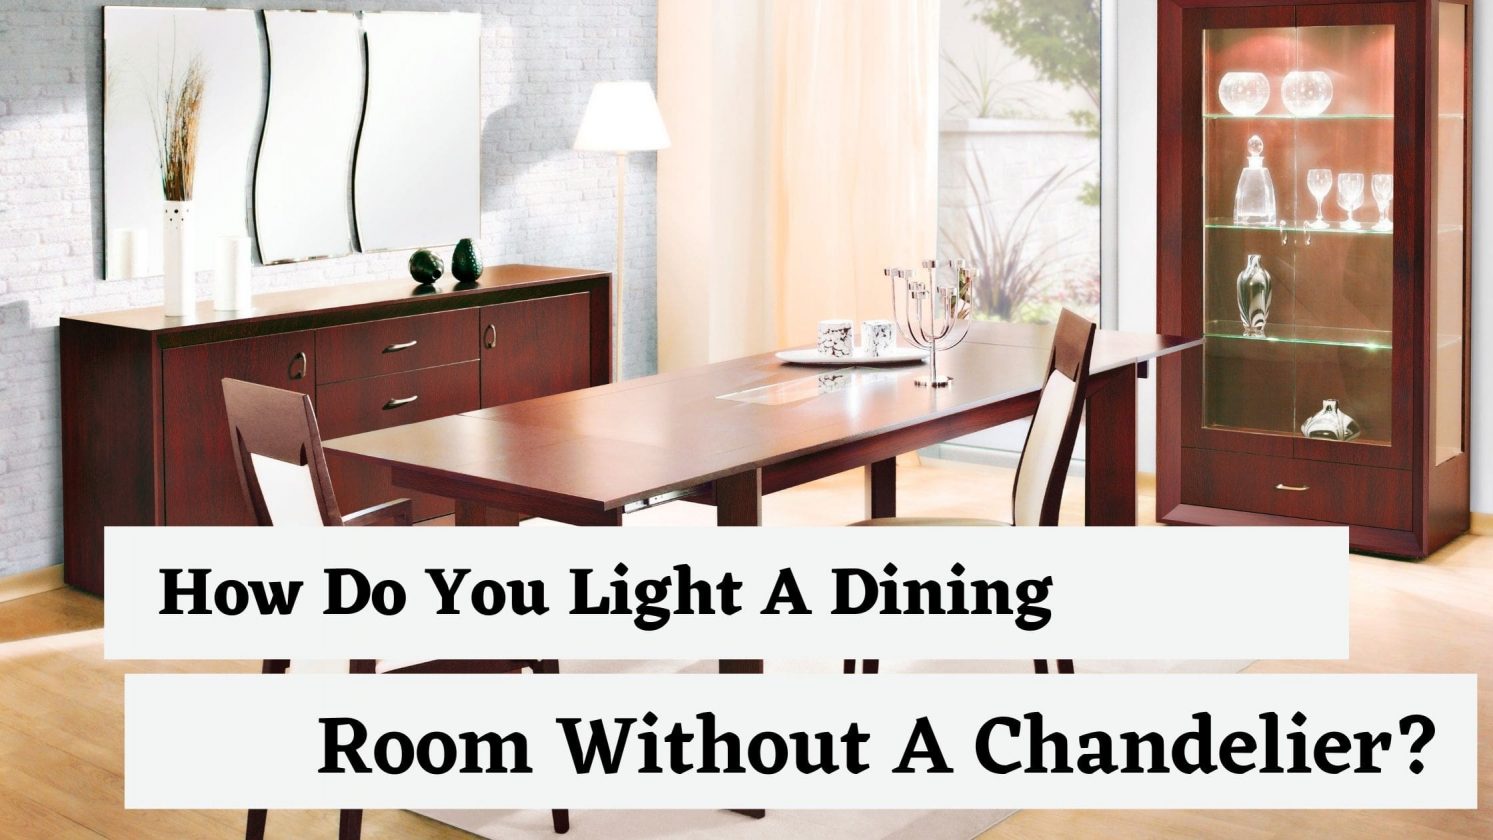 How Do You Light A Dining Room Without A Chandelier?